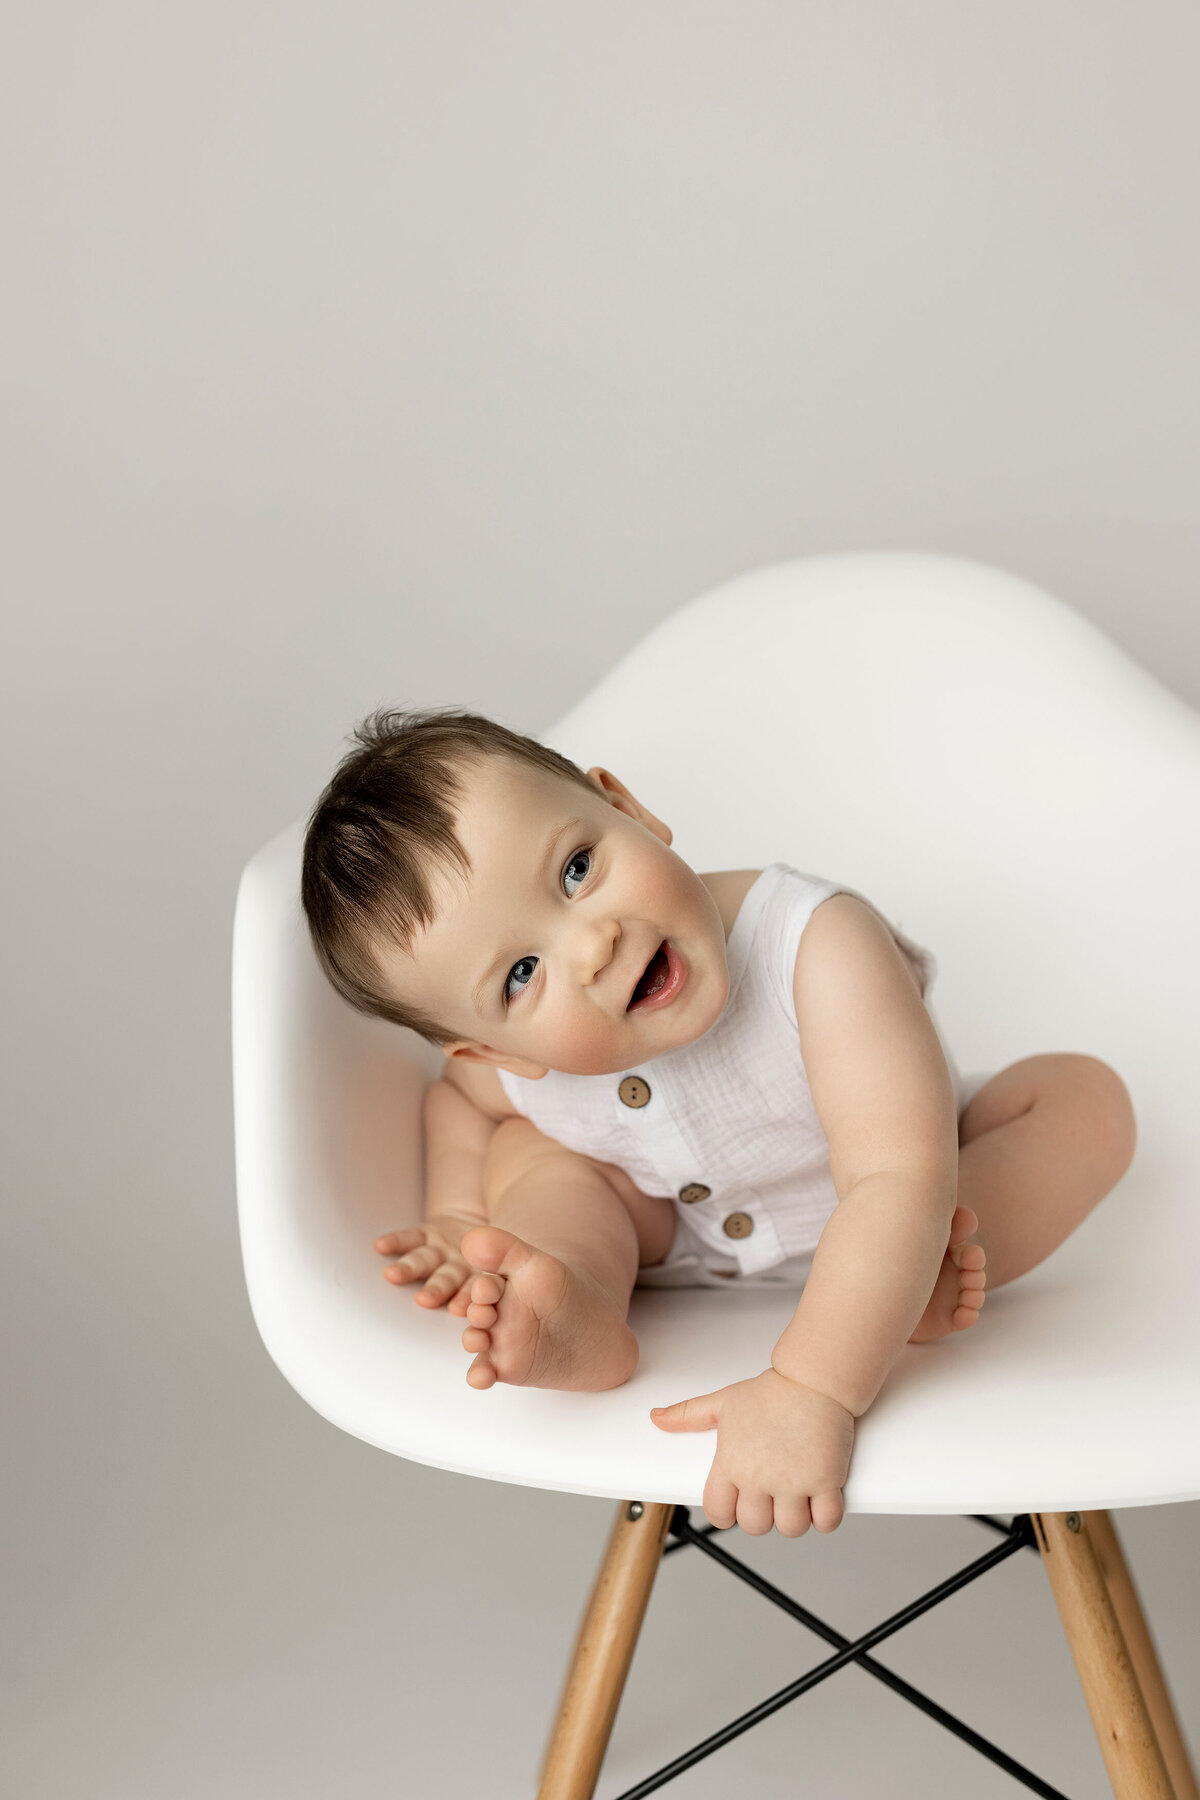 Baby boy in white romper sitting in white eames-style chair. Baby is looking off to the side and smiling. Photo taken in London, Ontario baby photo studio.